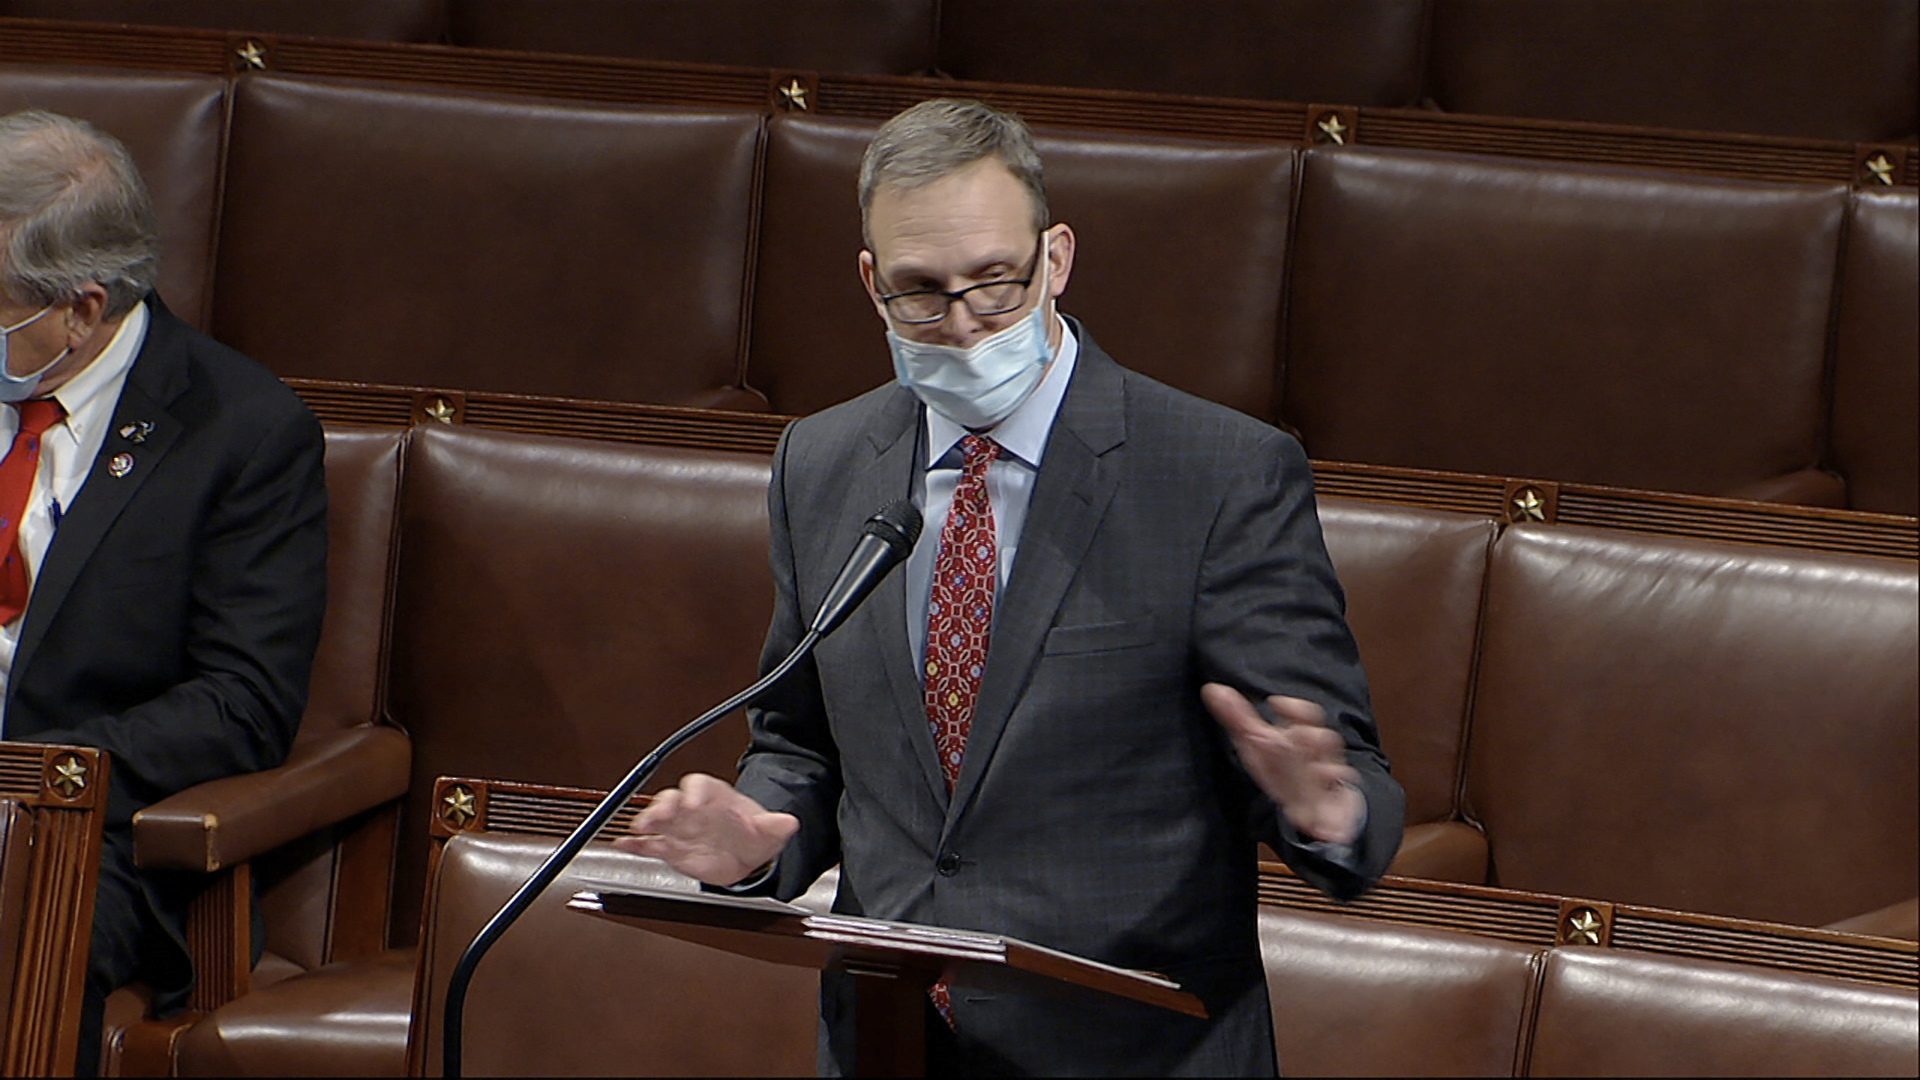 In this image from video, Rep. Scott Perry, R-Pa., speaks as the House debates the objection to confirm the Electoral College vote from Pennsylvania, at the U.S. Capitol early Thursday, Jan. 7, 2021.